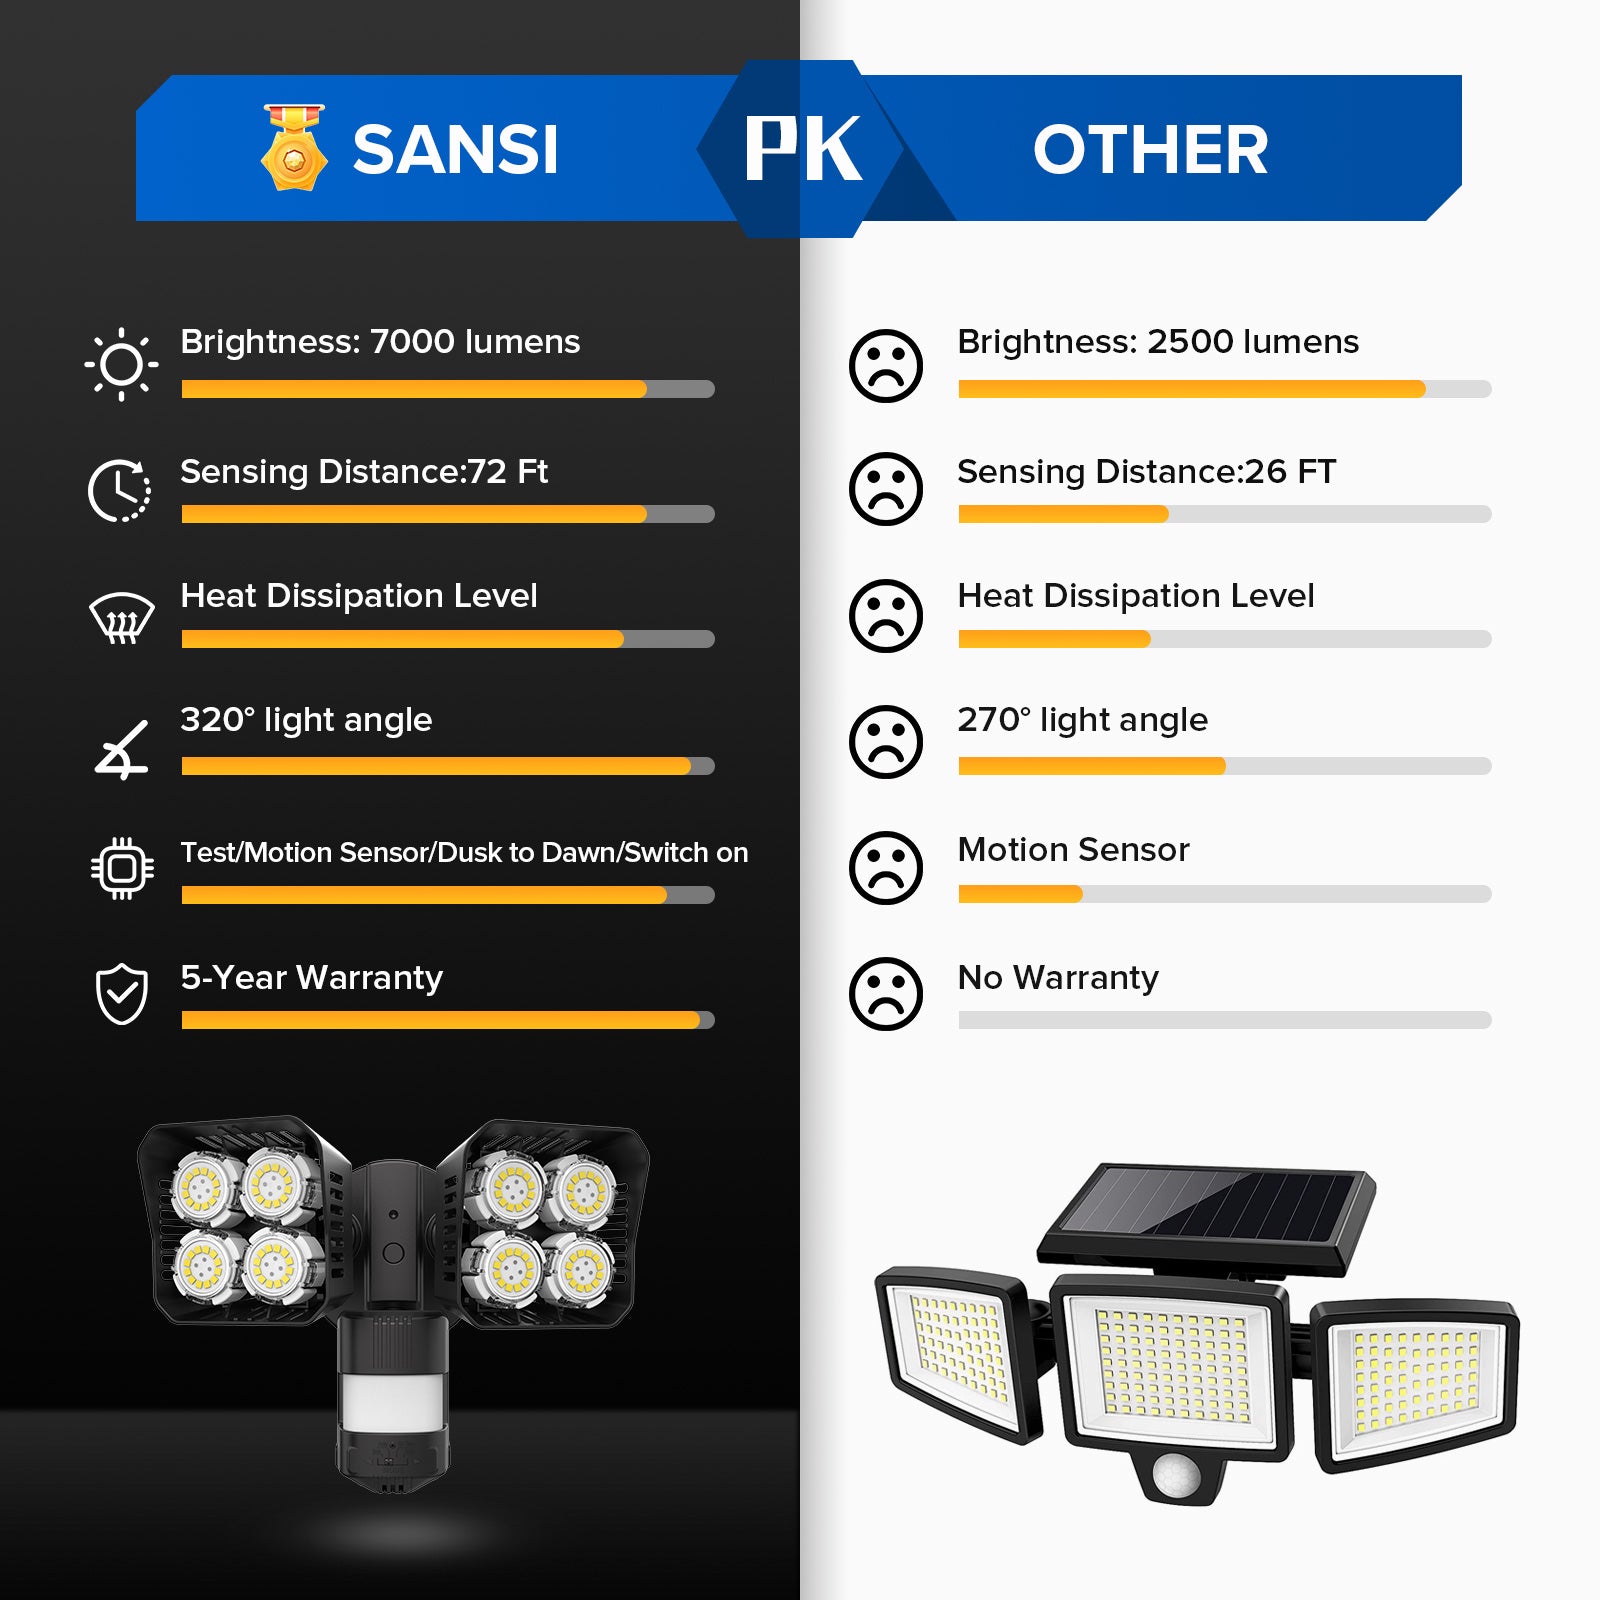 Square Upgraded 54W Led Security Light (Dusk to Dawn&Motion Sensor), 7000 lumens, 72 FT sensing distance, heat dissipation level, 320° light angle, 4 modes, 5-year warranty